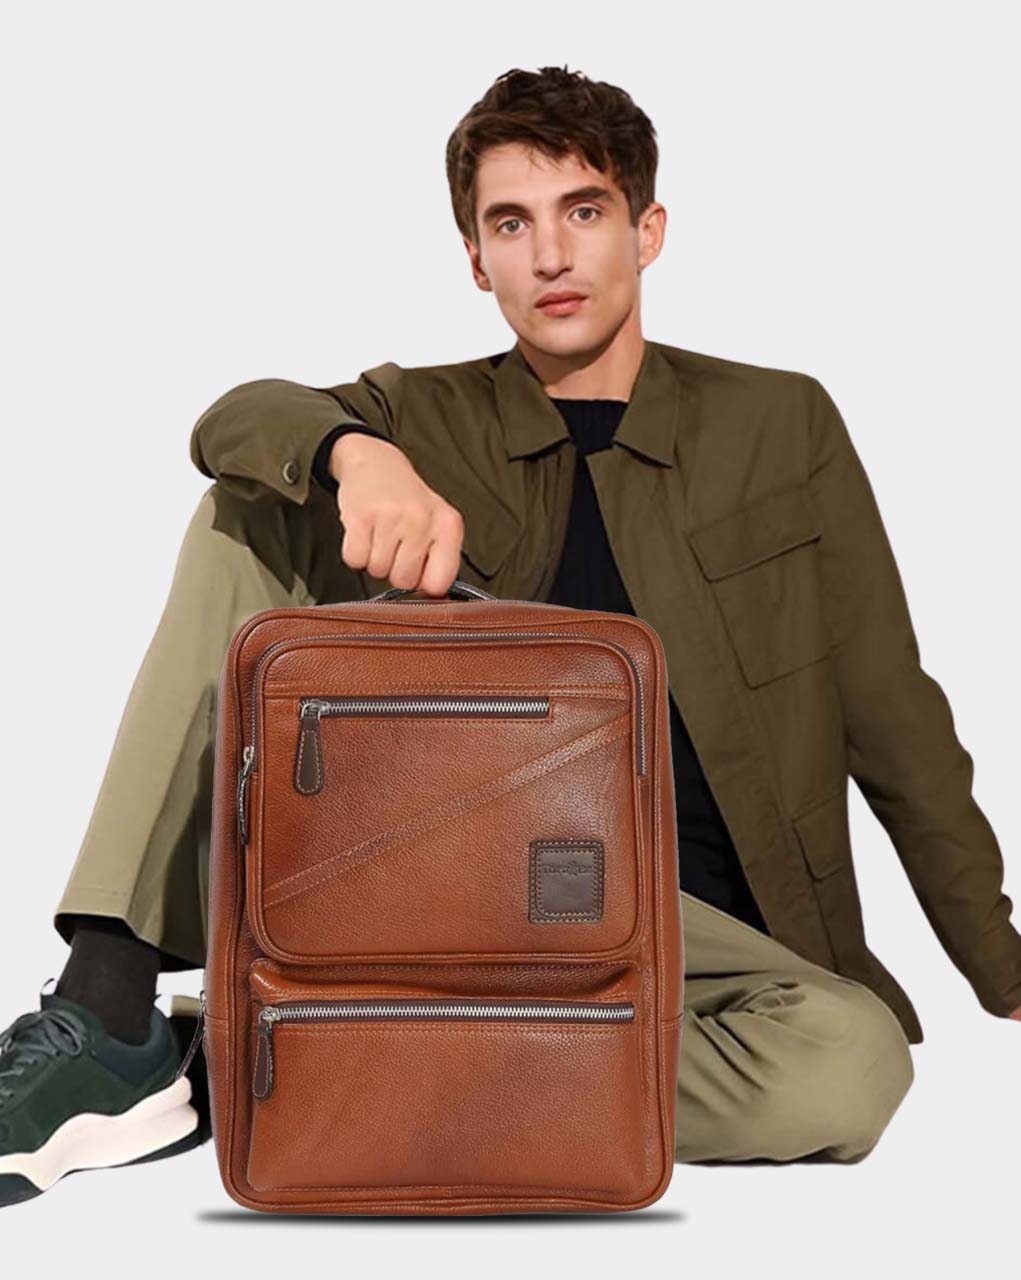 Lazaro Backpack best suit for Travelling!